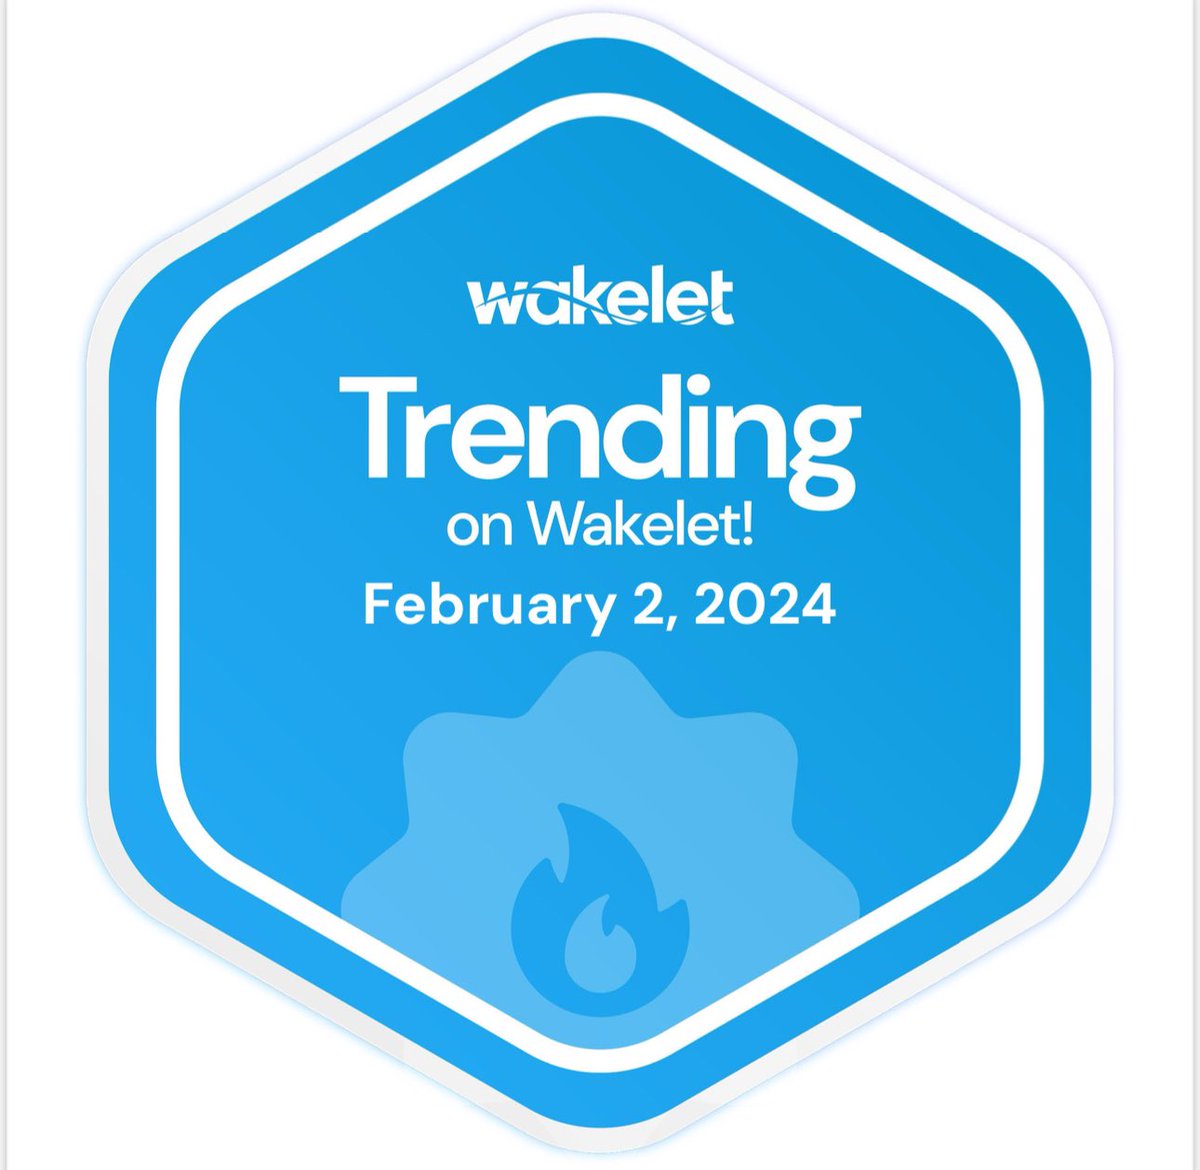 This morning I received fun news that one of my new collections is trending on @wakelet! 🔥 Probably because my new “All About Teams” collection just hit my subscriber inboxes. Go check it out! wakelet.com/@BeckyKeene @MicrosoftTeams